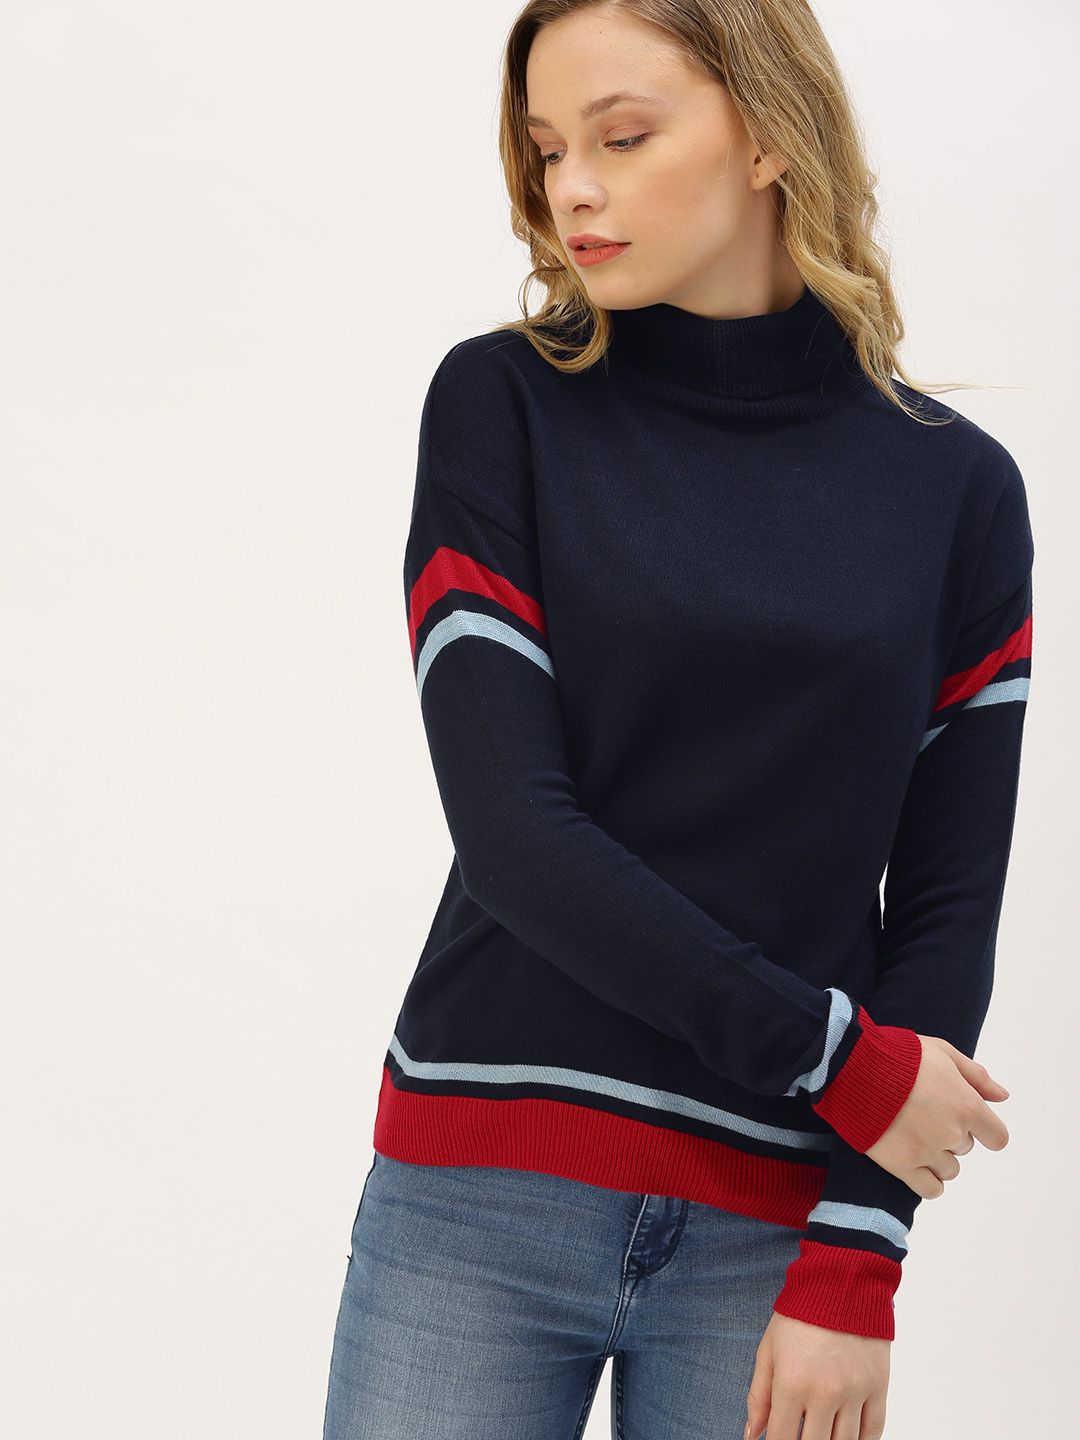 DressBerry Women Navy Blue Solid Sweater Price in India